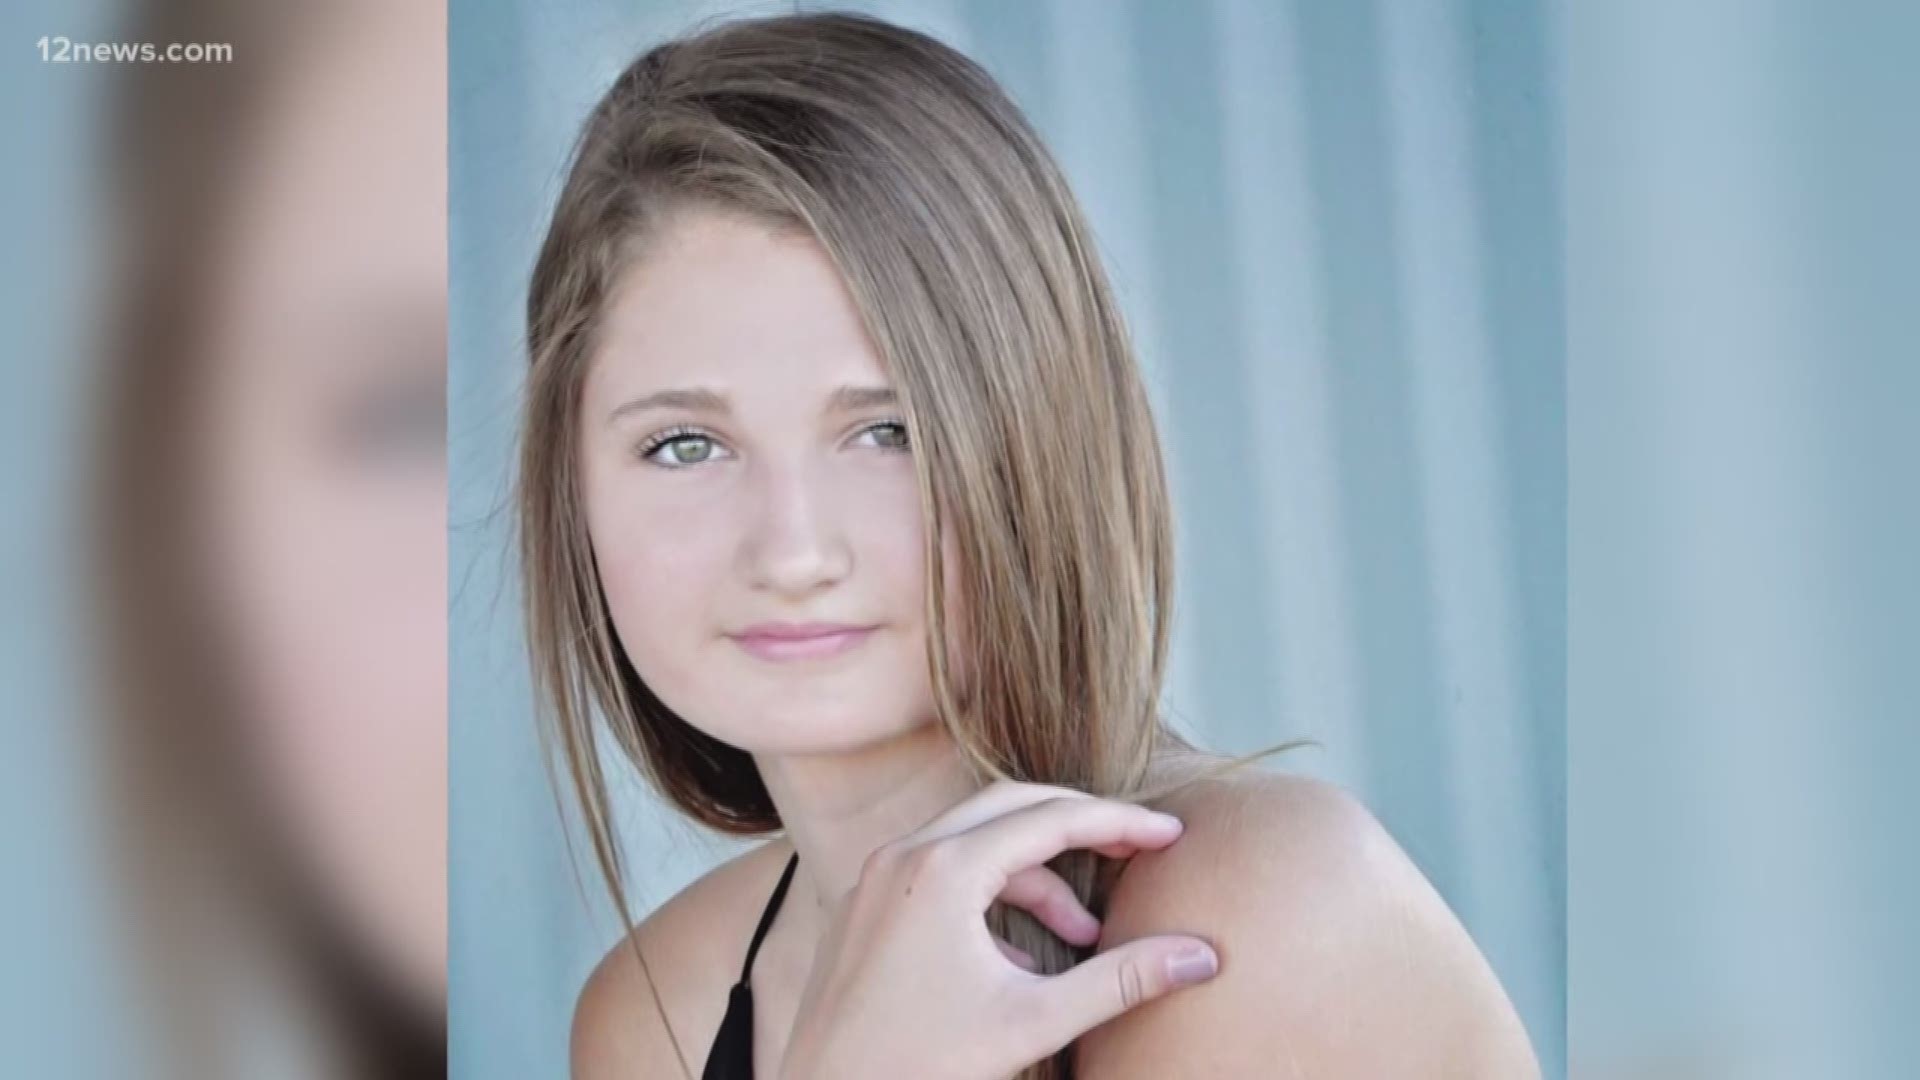 14-year-old Ella Thomas died in an accident involving a garbage truck over the weekend. Her friends and family are remembering Ella as an angel and as someone who was always nice to people. Ella was a passenger in a car that collided with a garbage truck and hit a tree near 51st Avenue and Thunderbird Road.